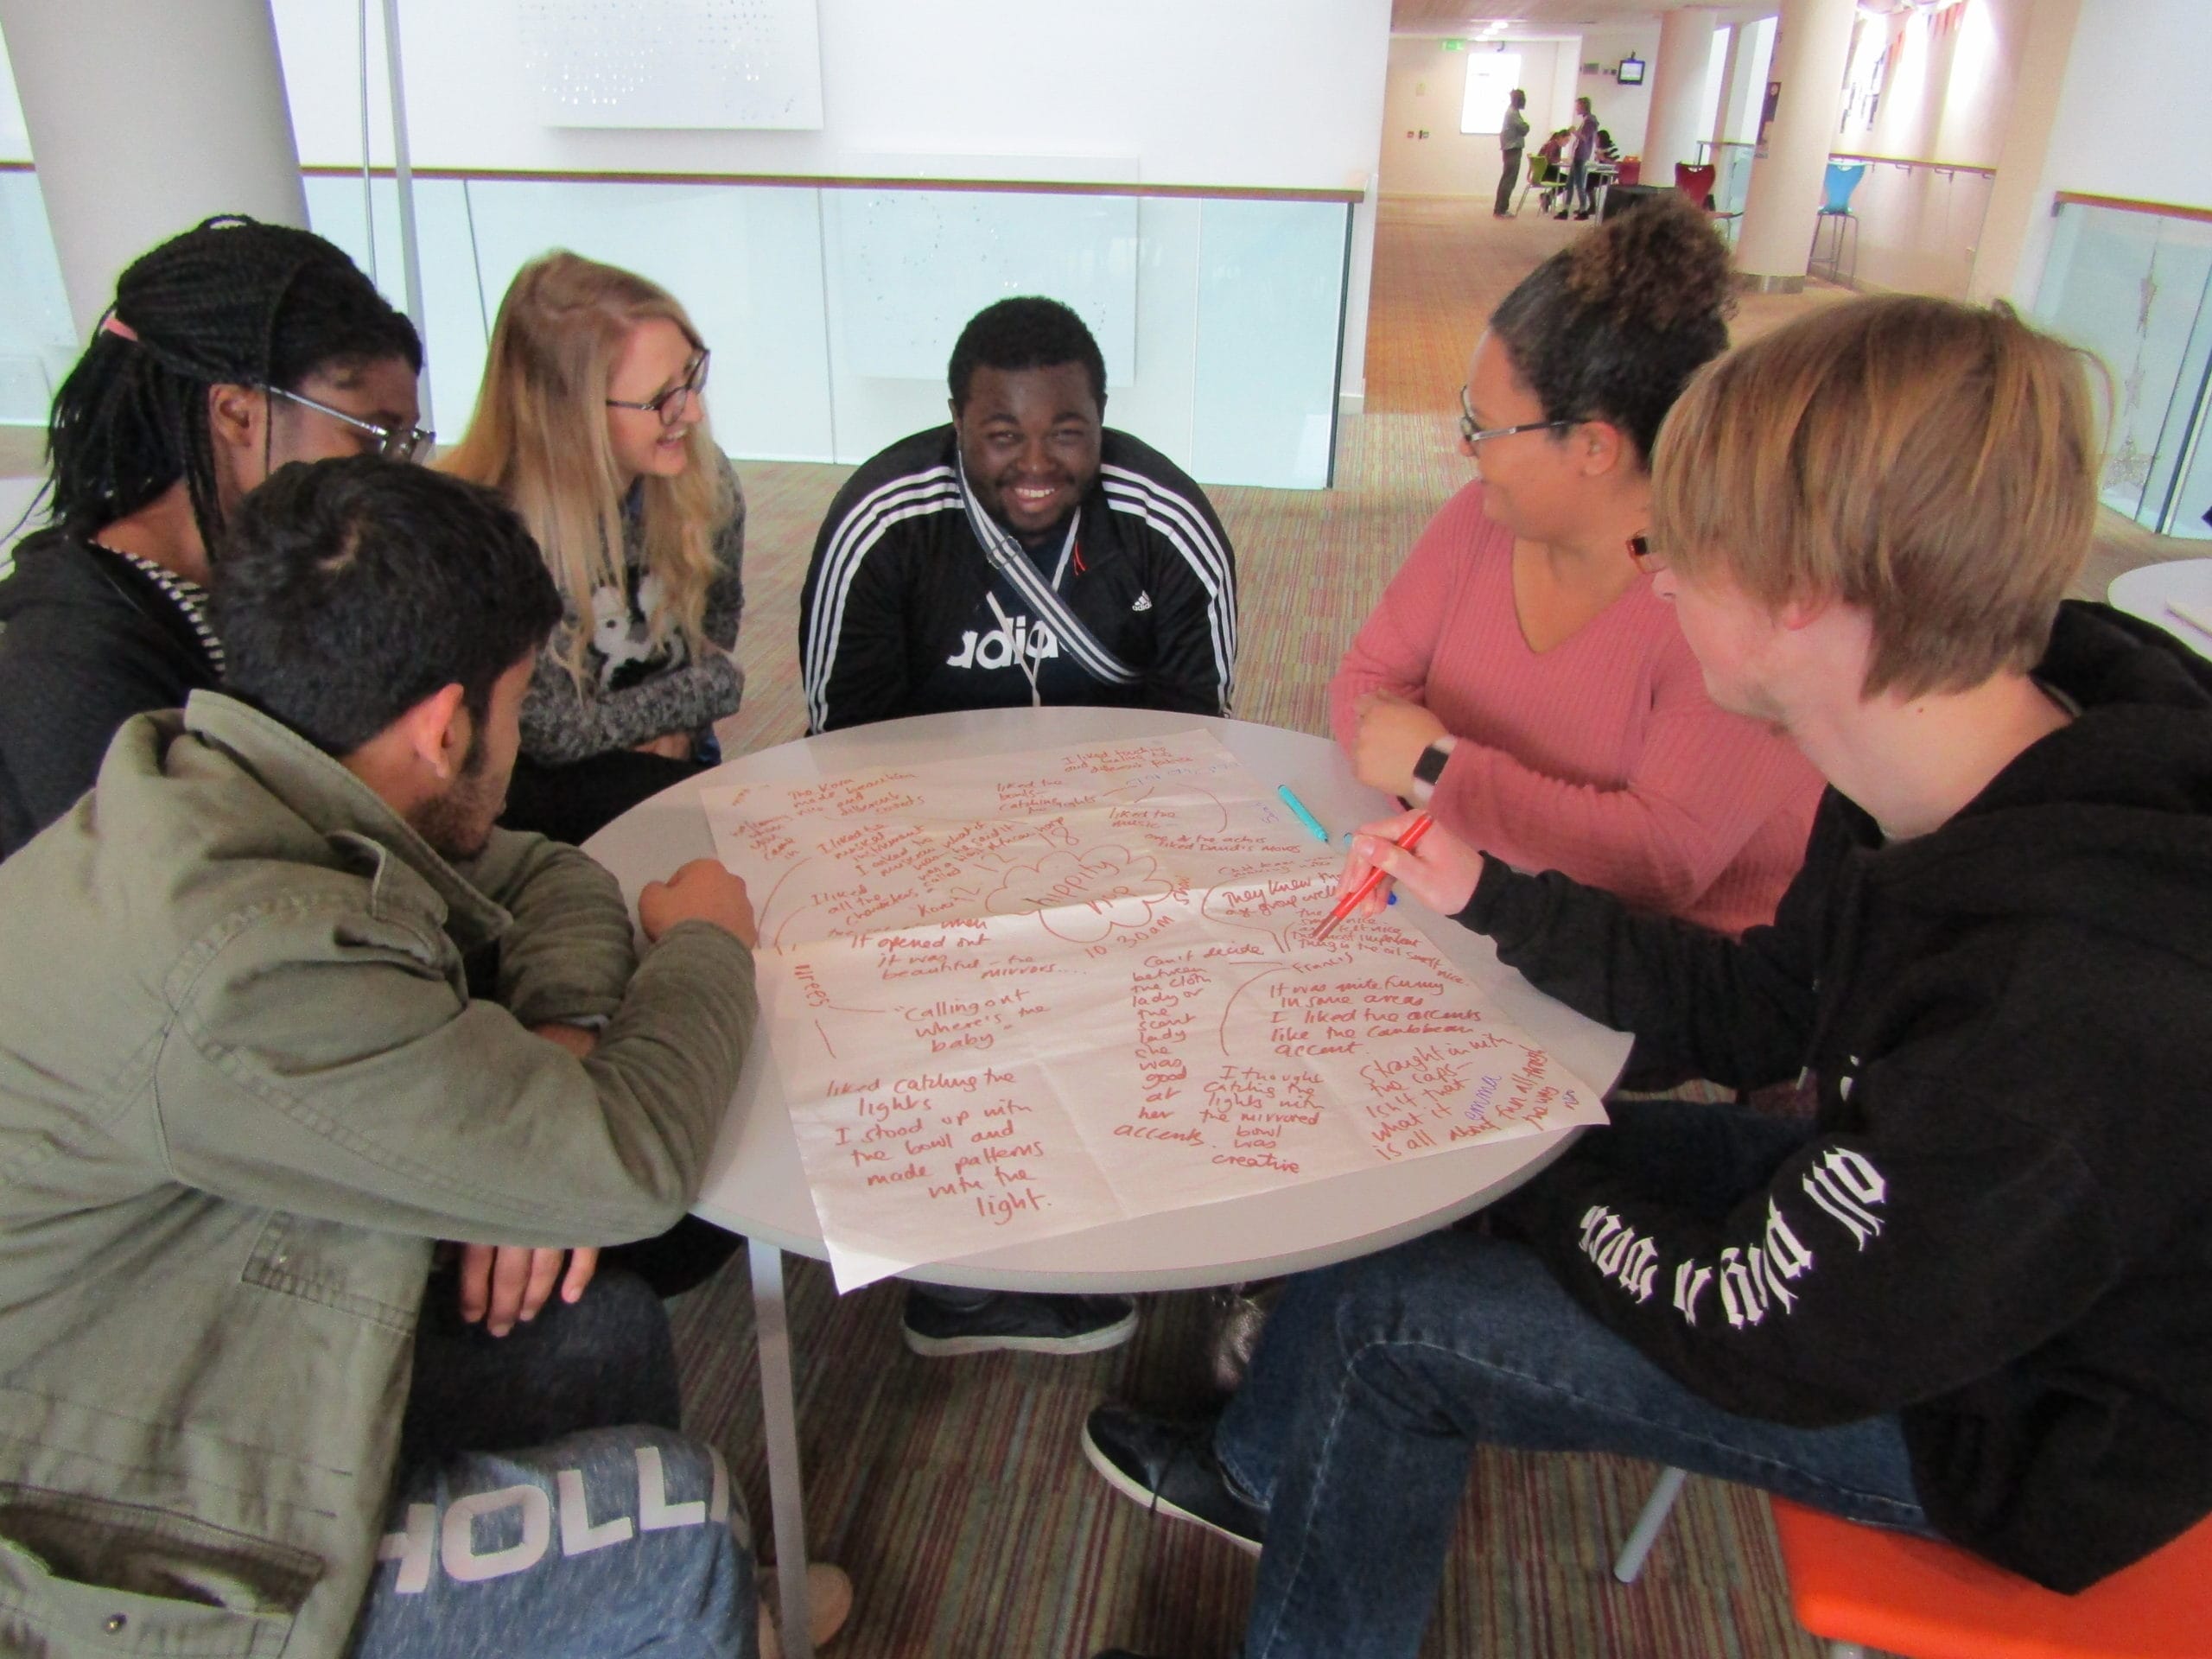 A diverse group of adults sit around a round table, all focusing on a collaborative mind-map. The mind-map is on a2 paper in orange marker. Everyone is smiling.